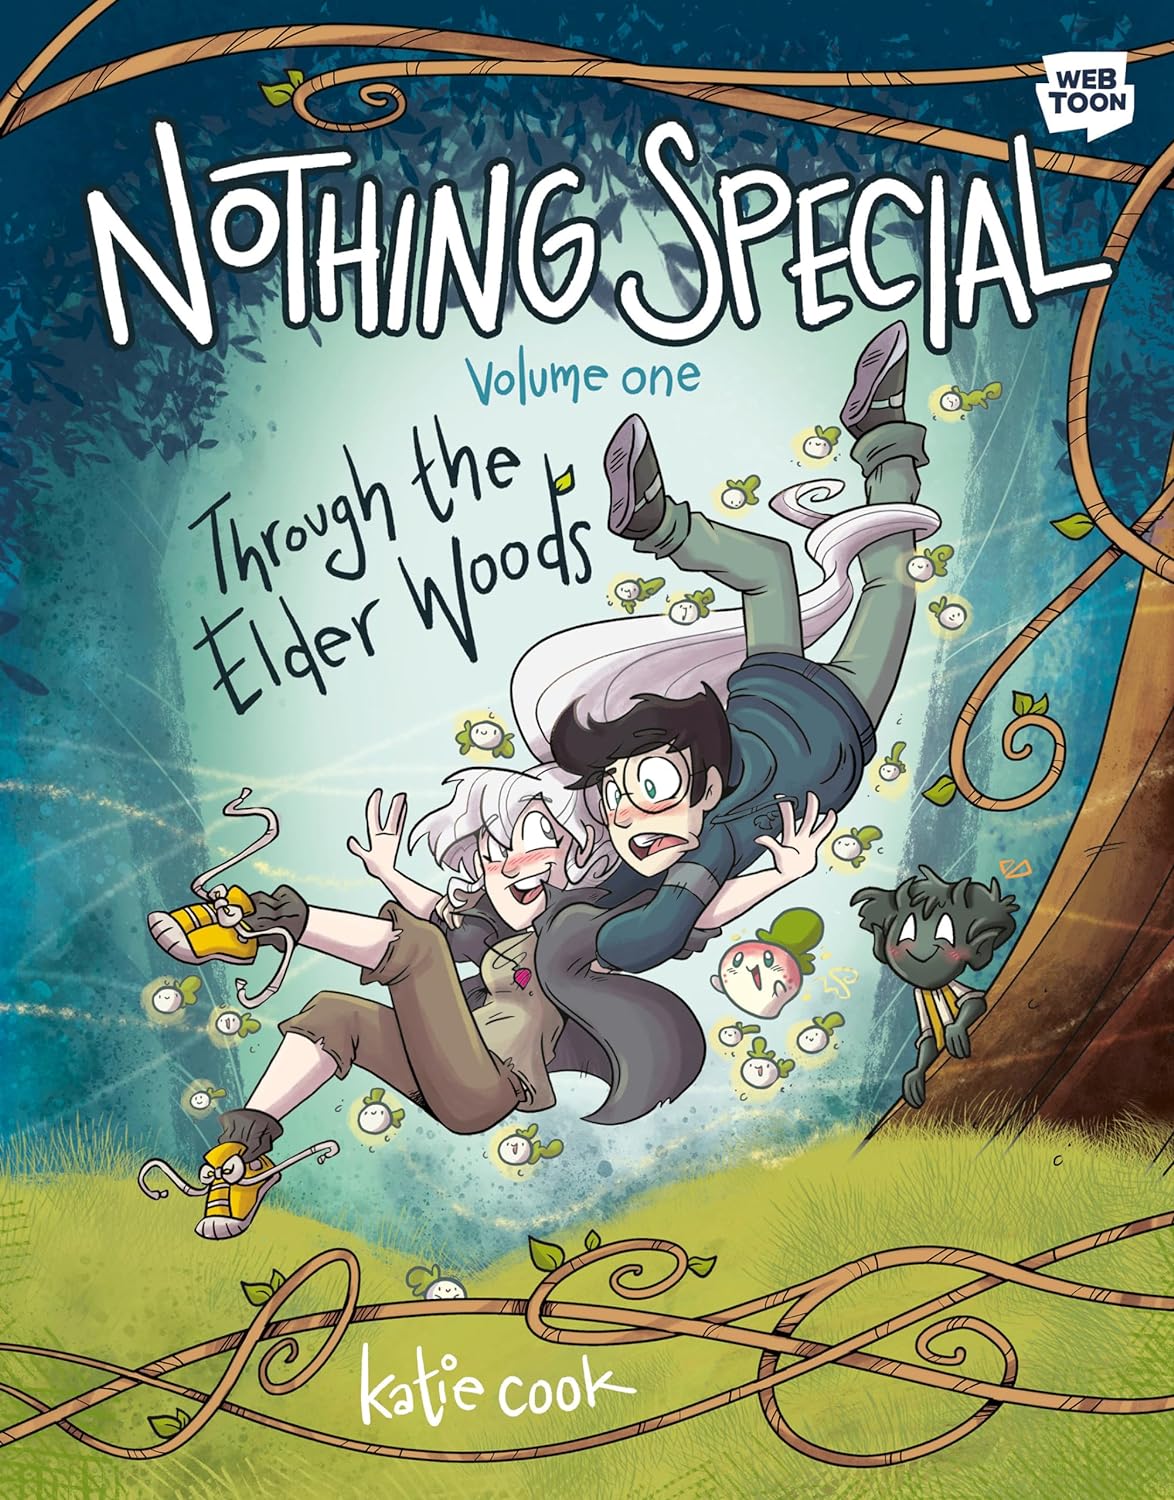 Nothing Special, Volume One: Through the Elder Woods by Katie Cook